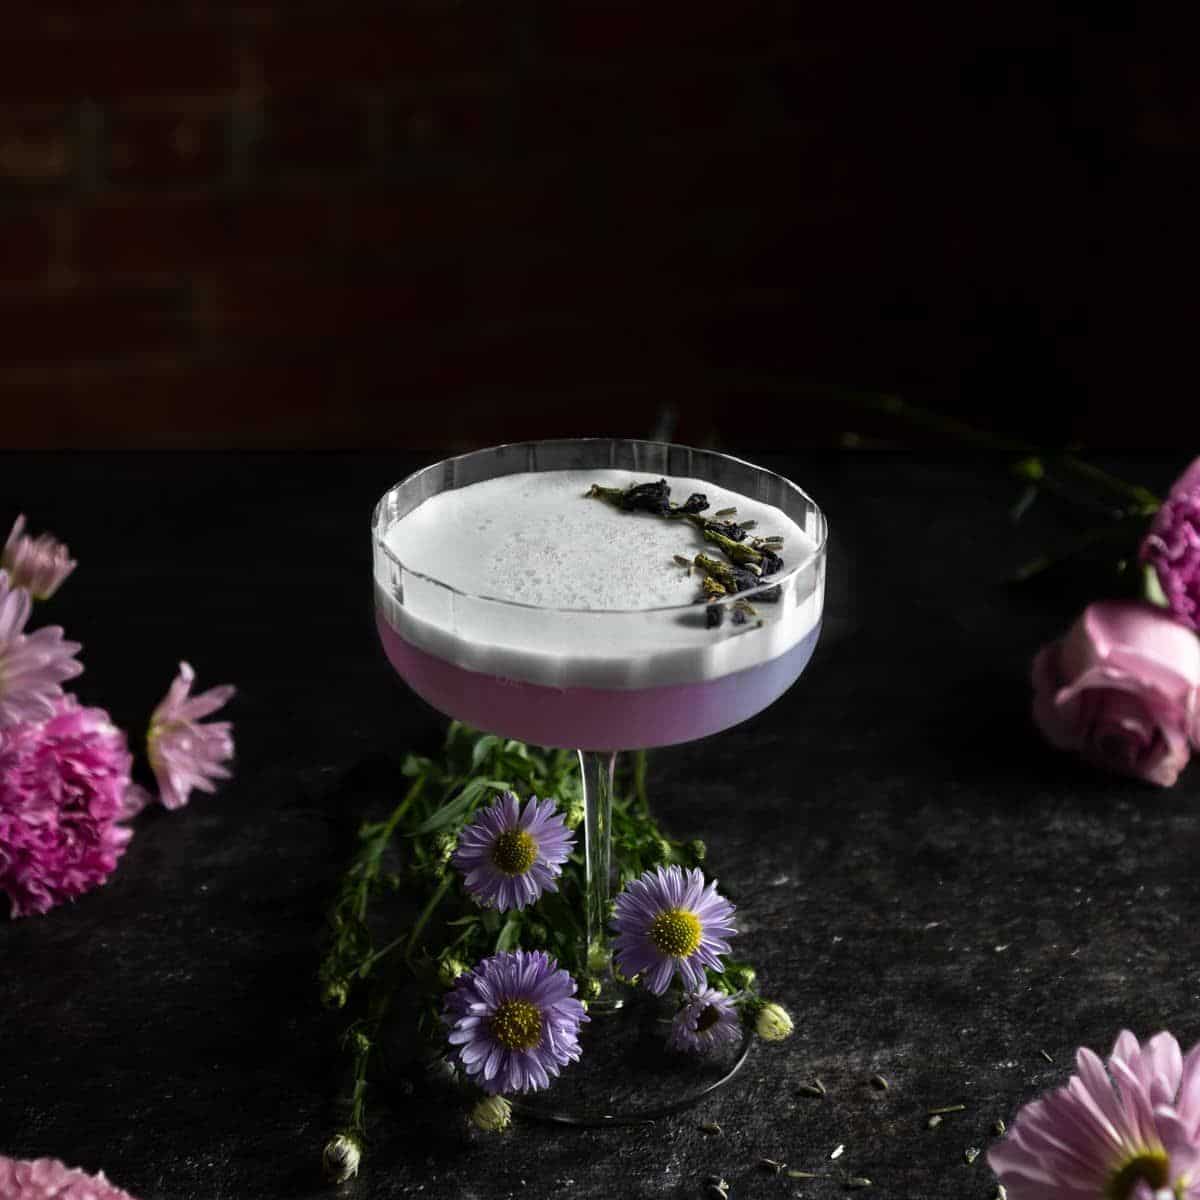 The Lavender Empress: A Gin Sour Cocktail